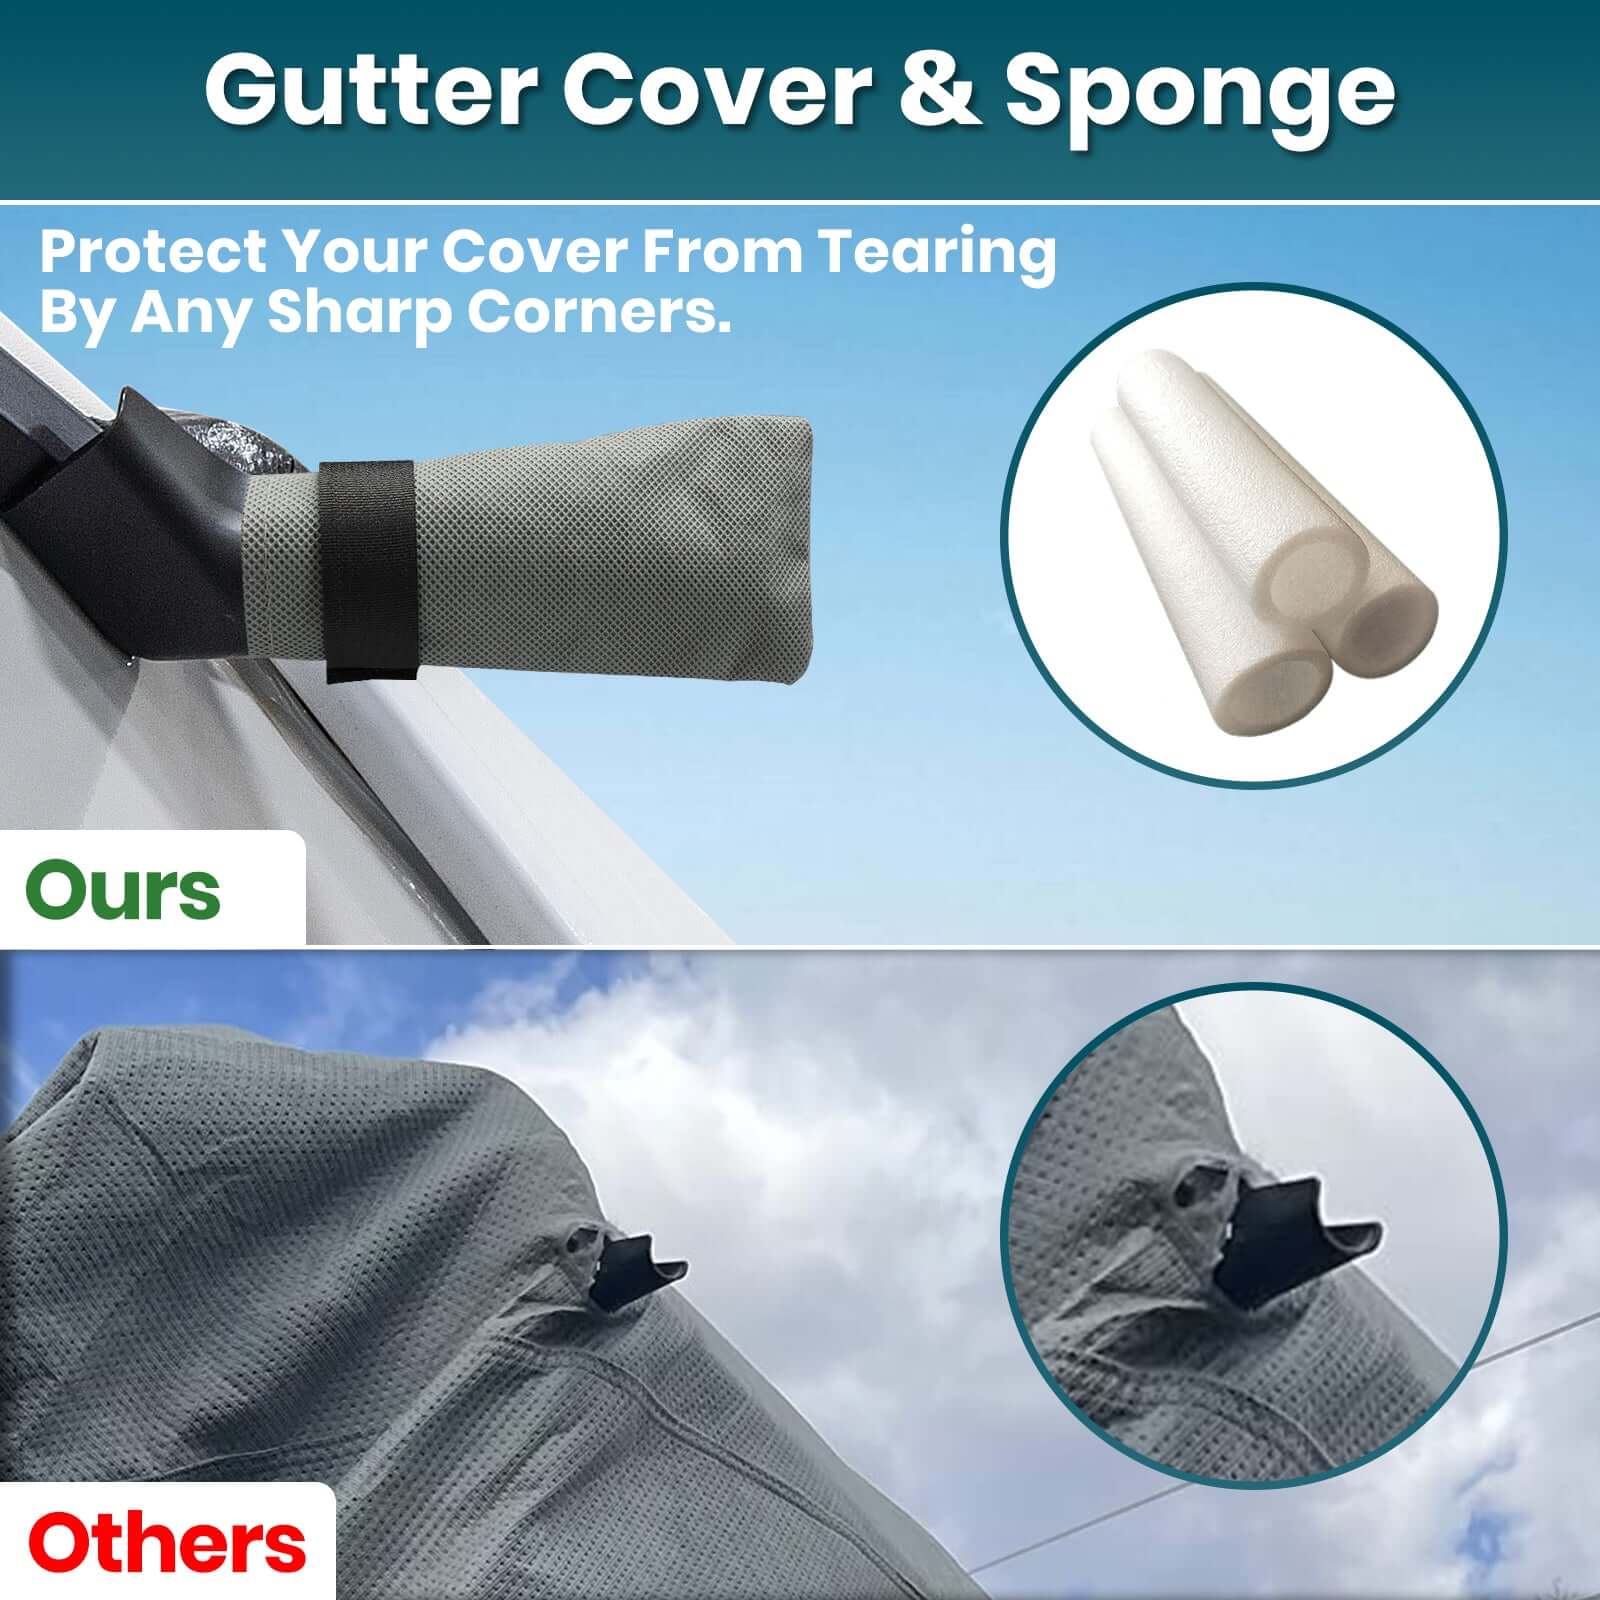 Camper Covers | Travel Trailer RV Covers 8 Layers Winter Waterproof